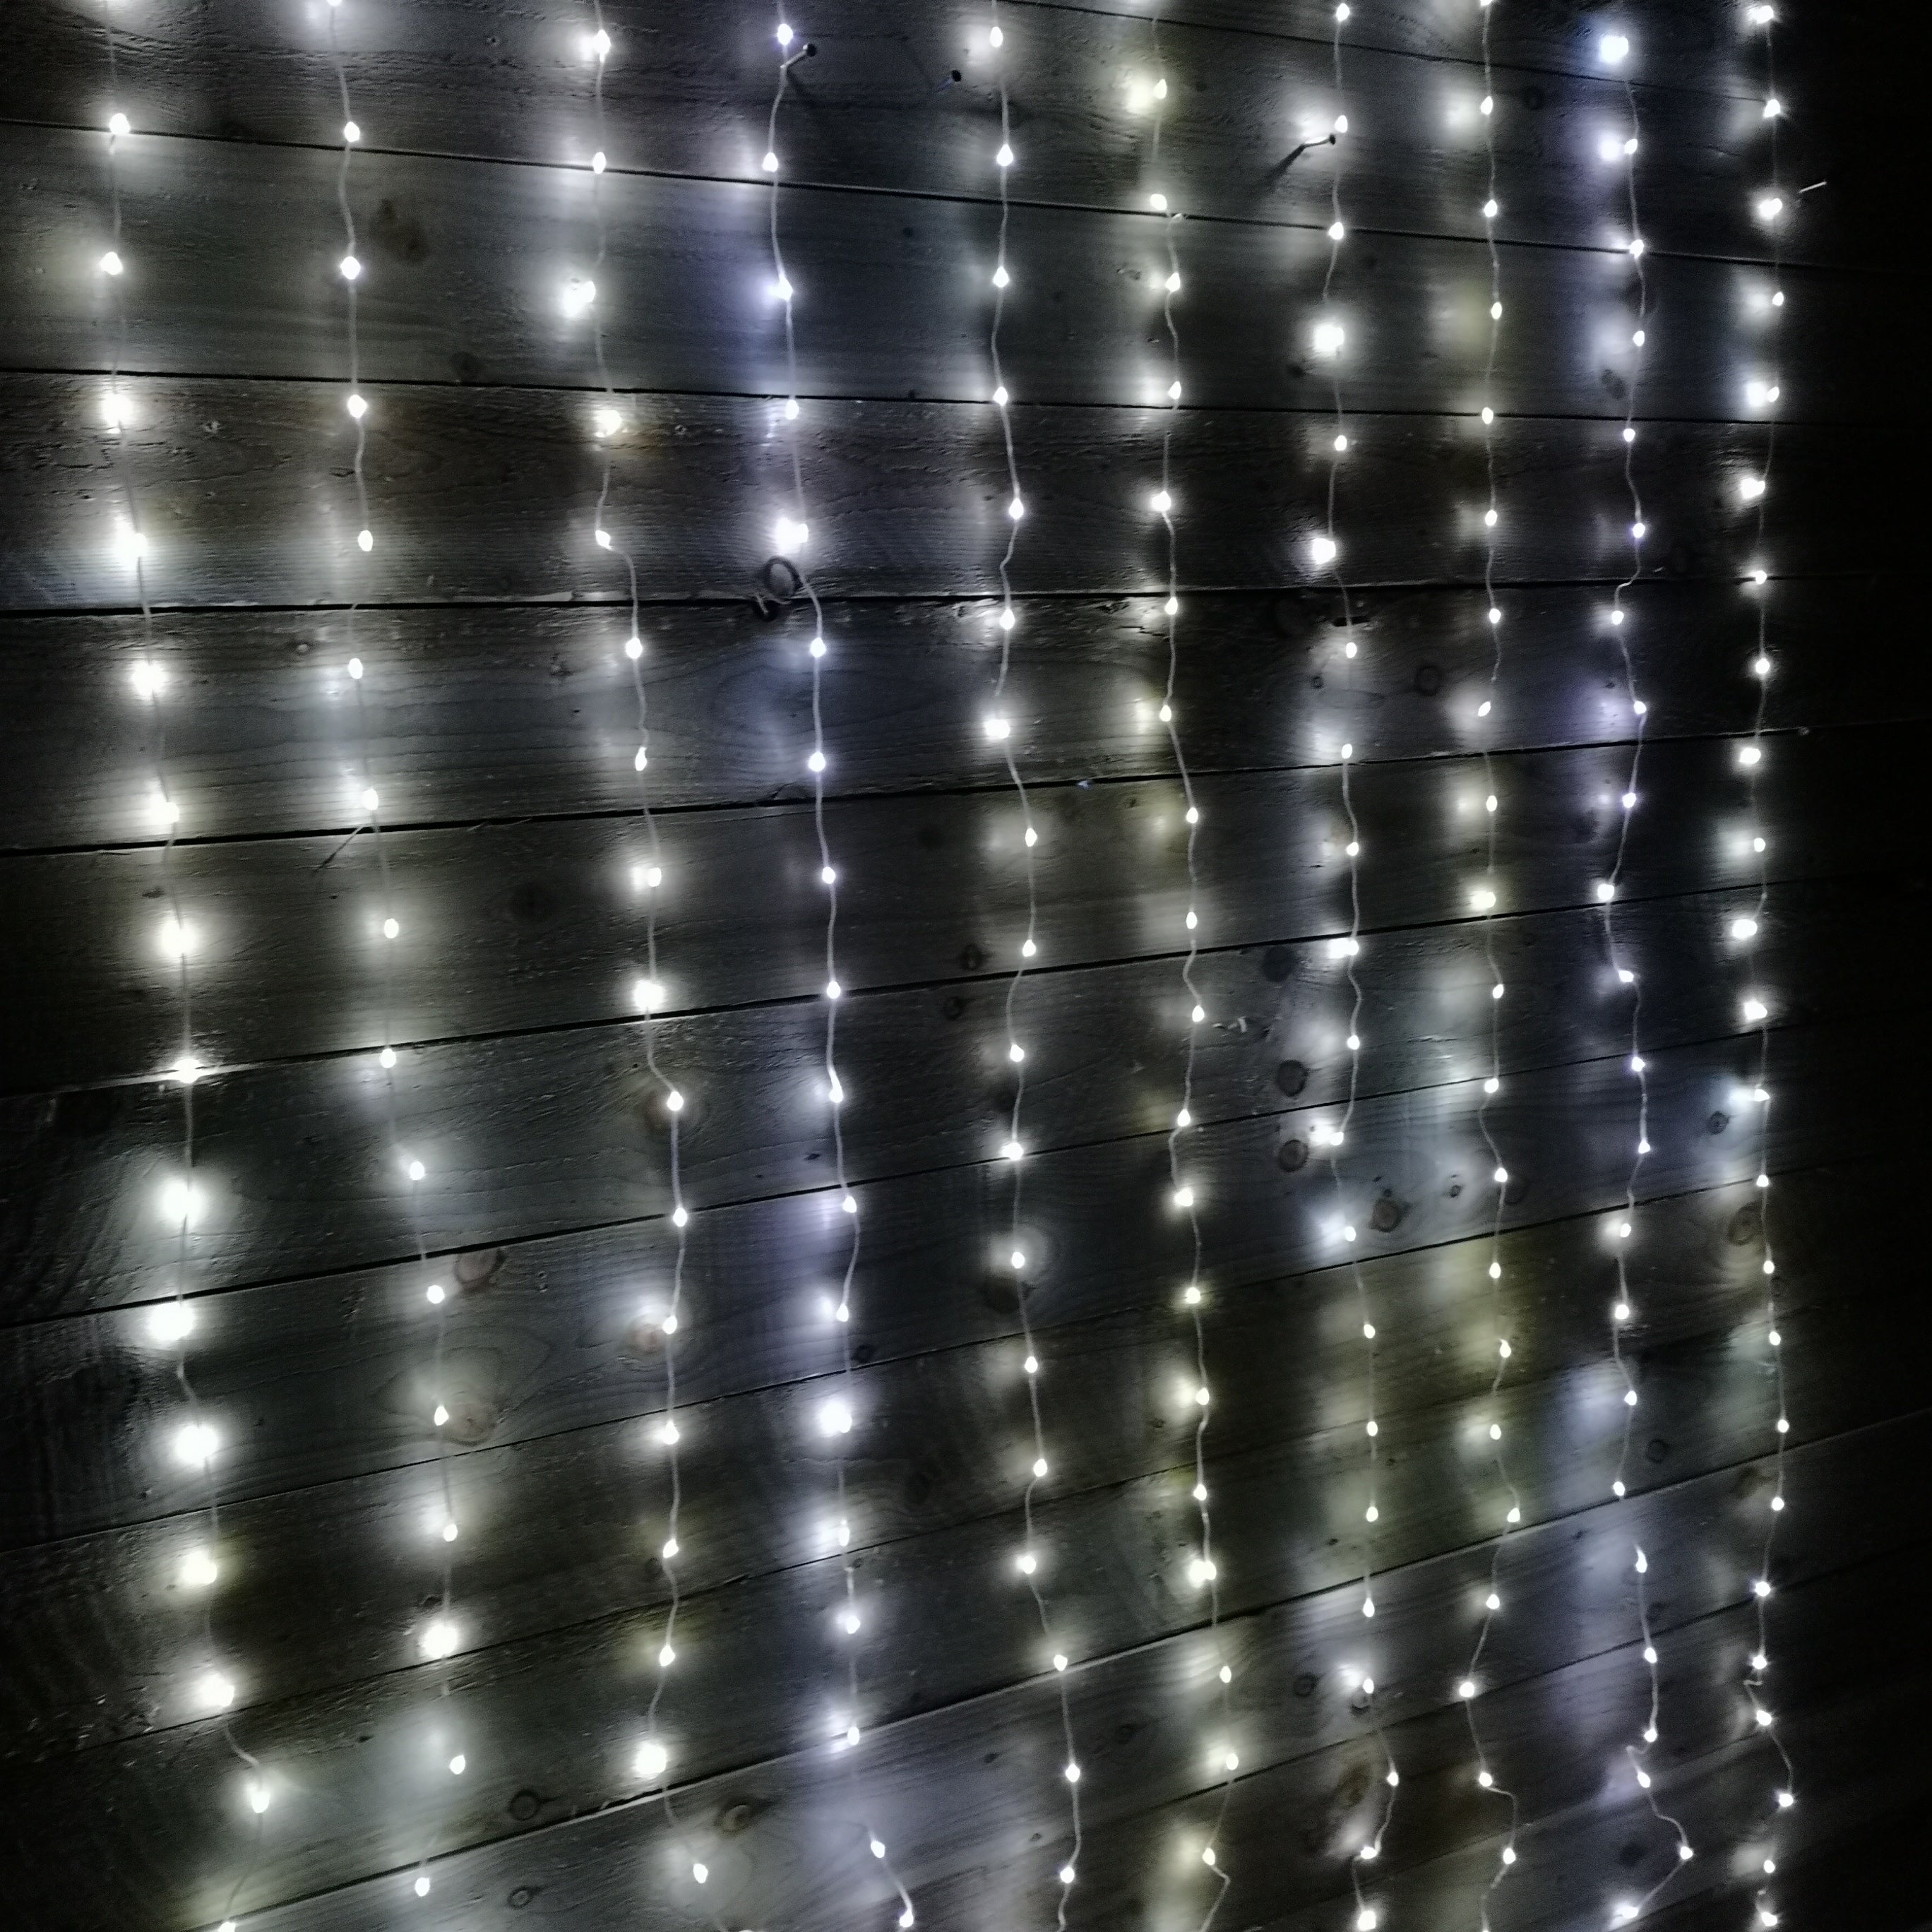 240 LED 2m x 1.5m Premier Flexibright Curtain Indoor Outdoor Multifunction Christmas Lights with Timer in Choice of Colour